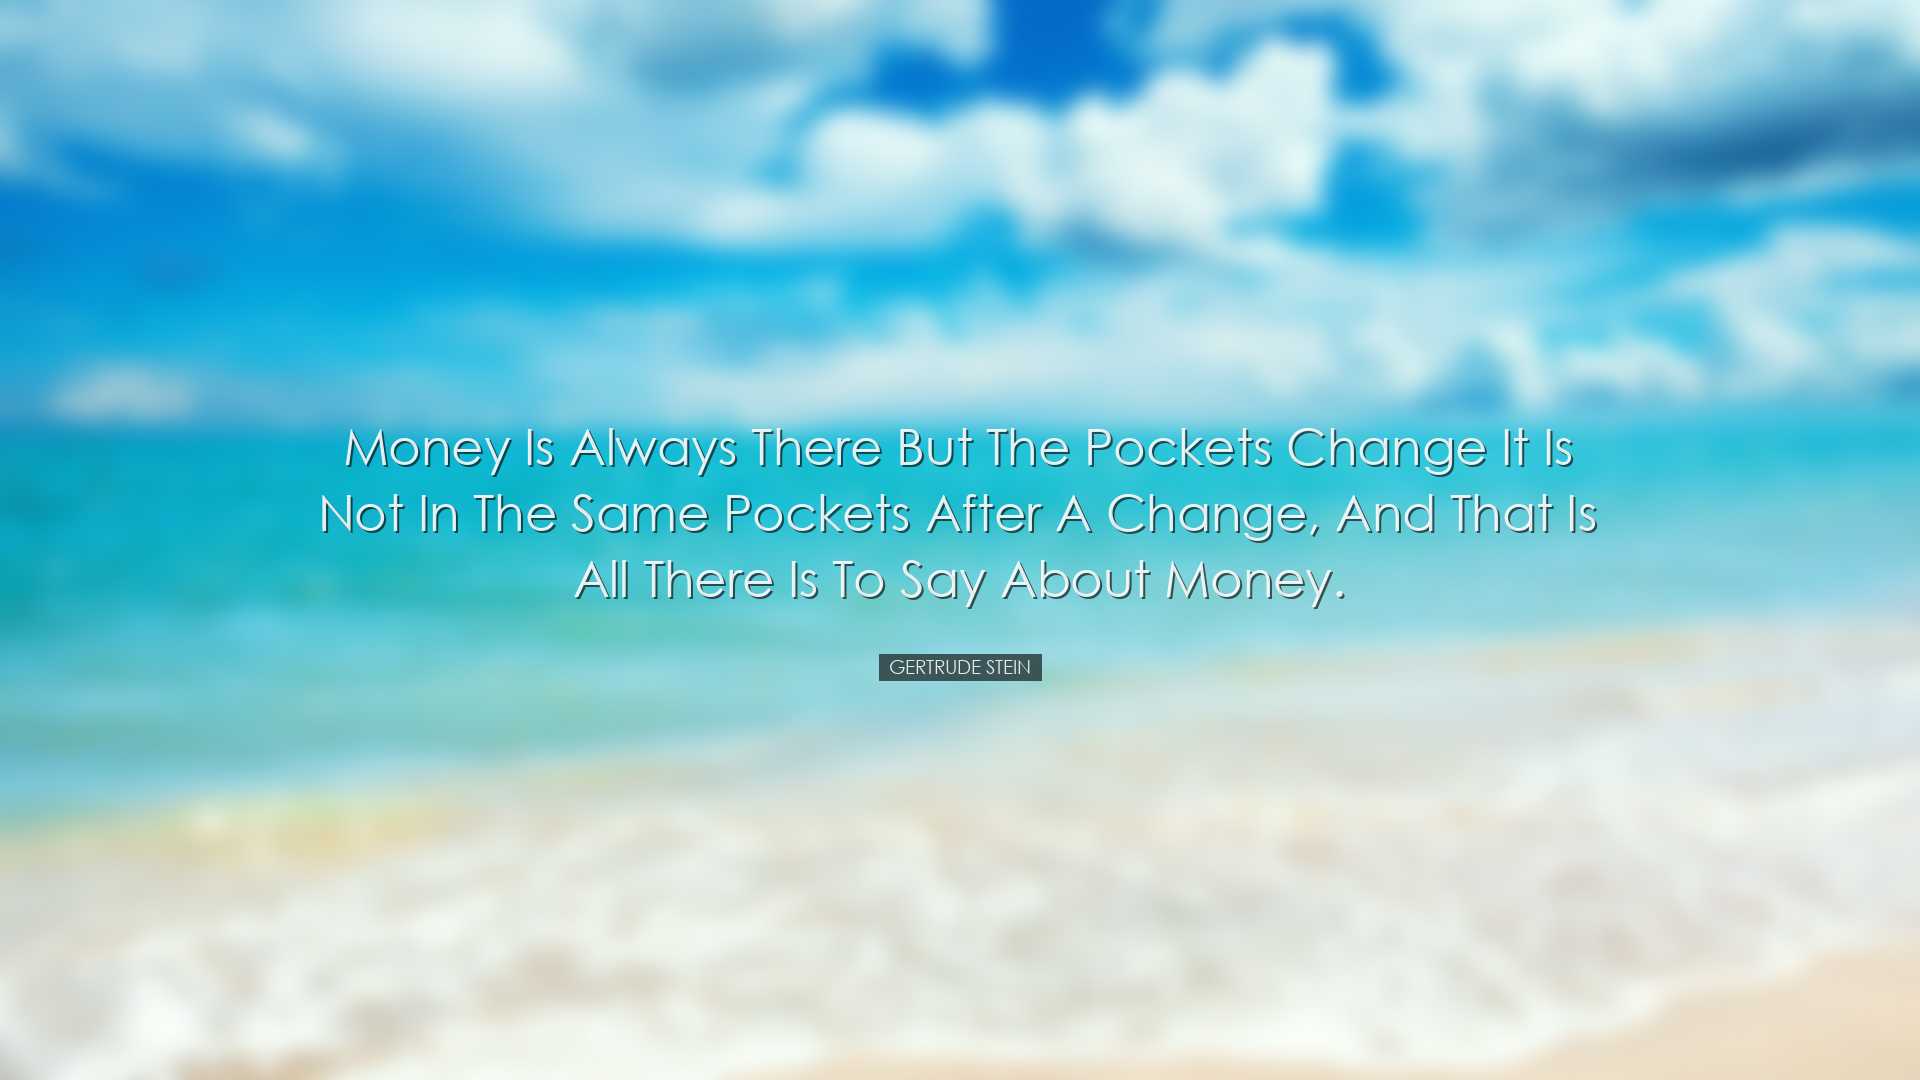 Money is always there but the pockets change it is not in the same